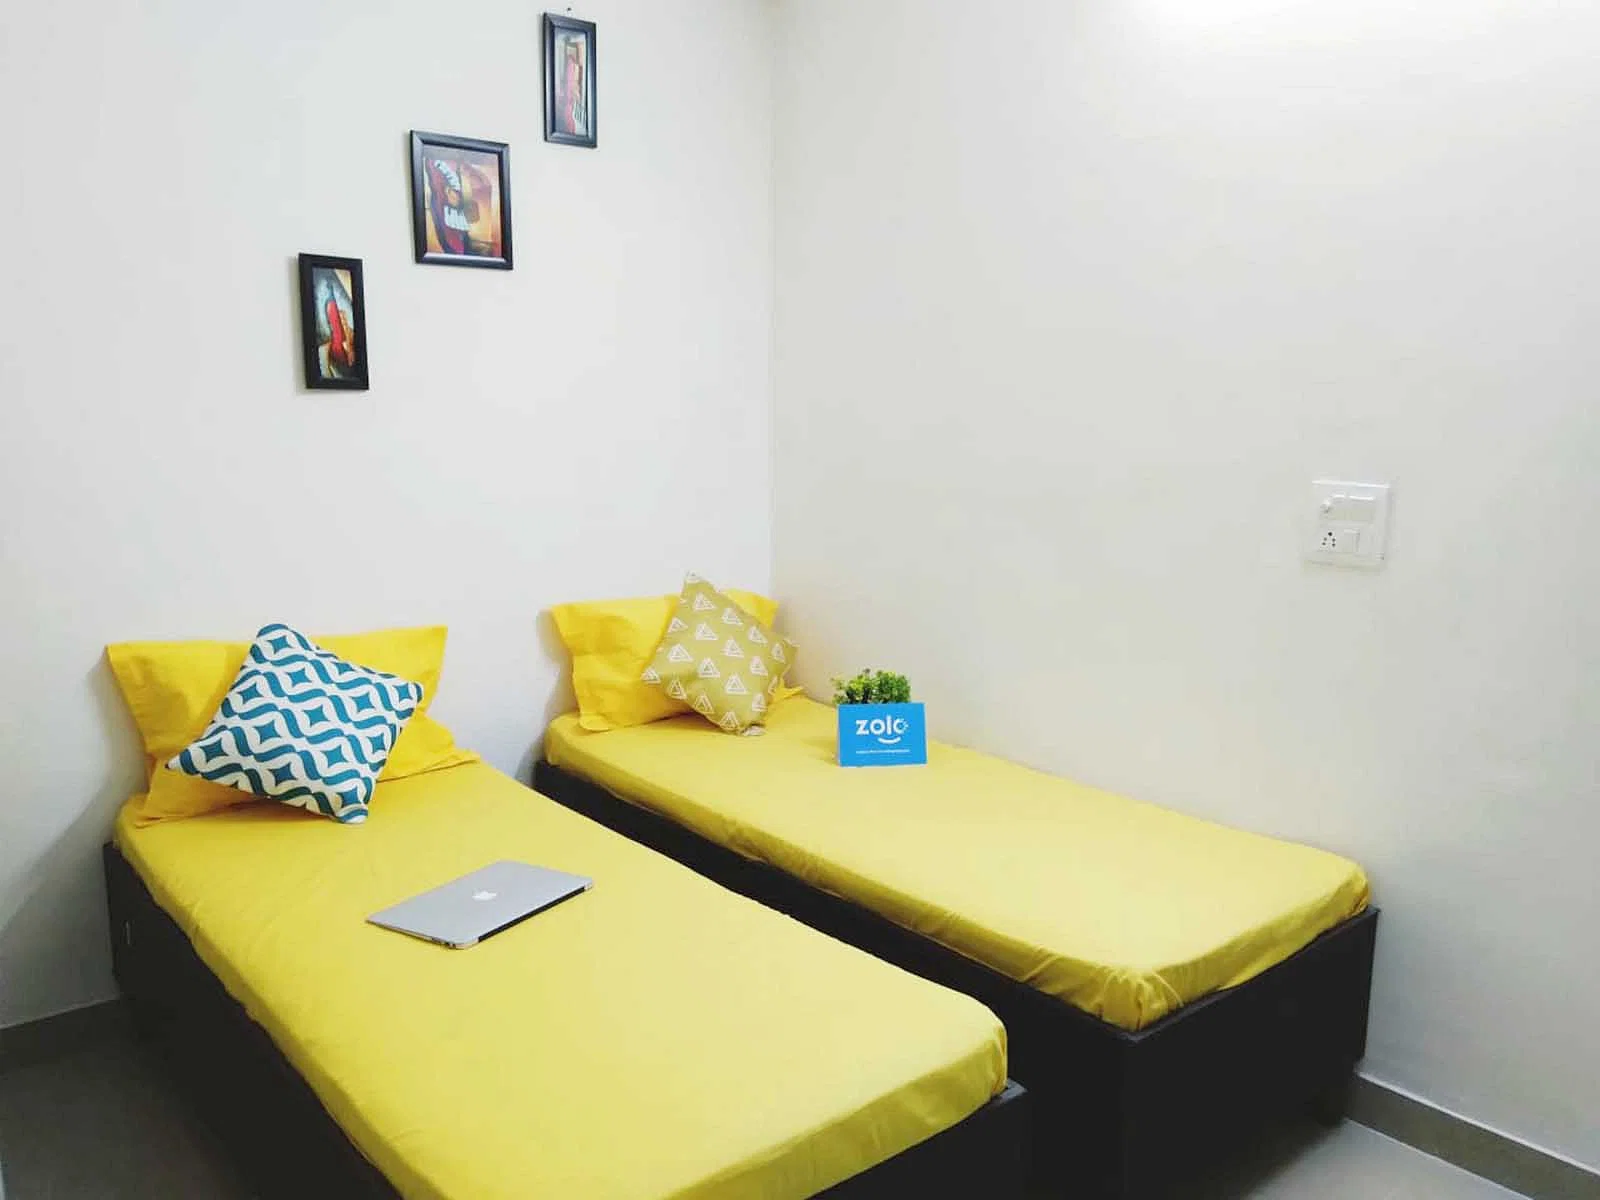 Fully furnished single/sharing rooms for rent in Satya Niketan with no brokerage-apply fast-Zolo Youth